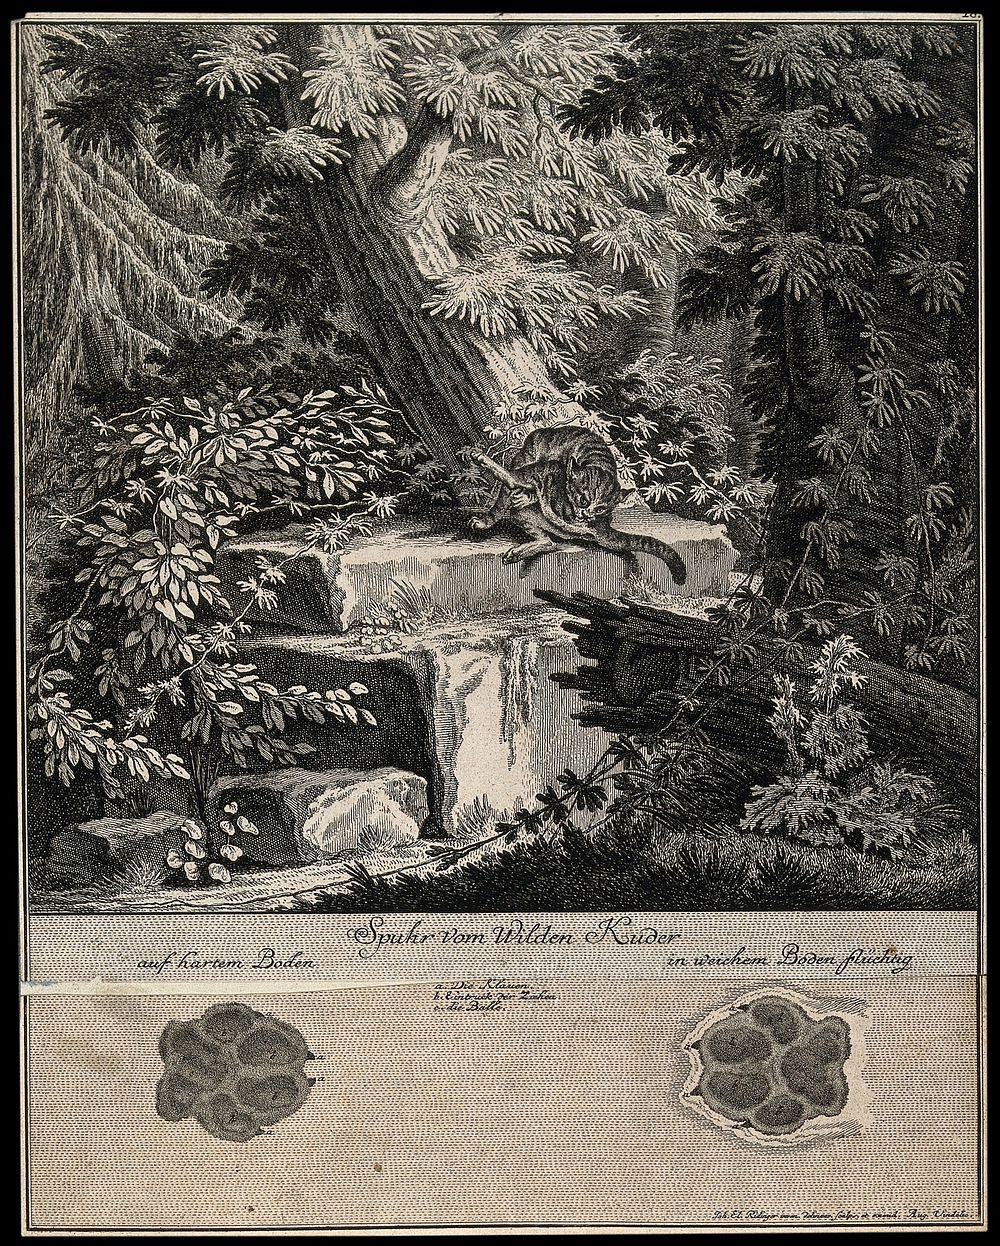 Above, a wildcat grooming itself on a pedestal in the forest, below, its tracks. Etching by J.E. Ridinger.